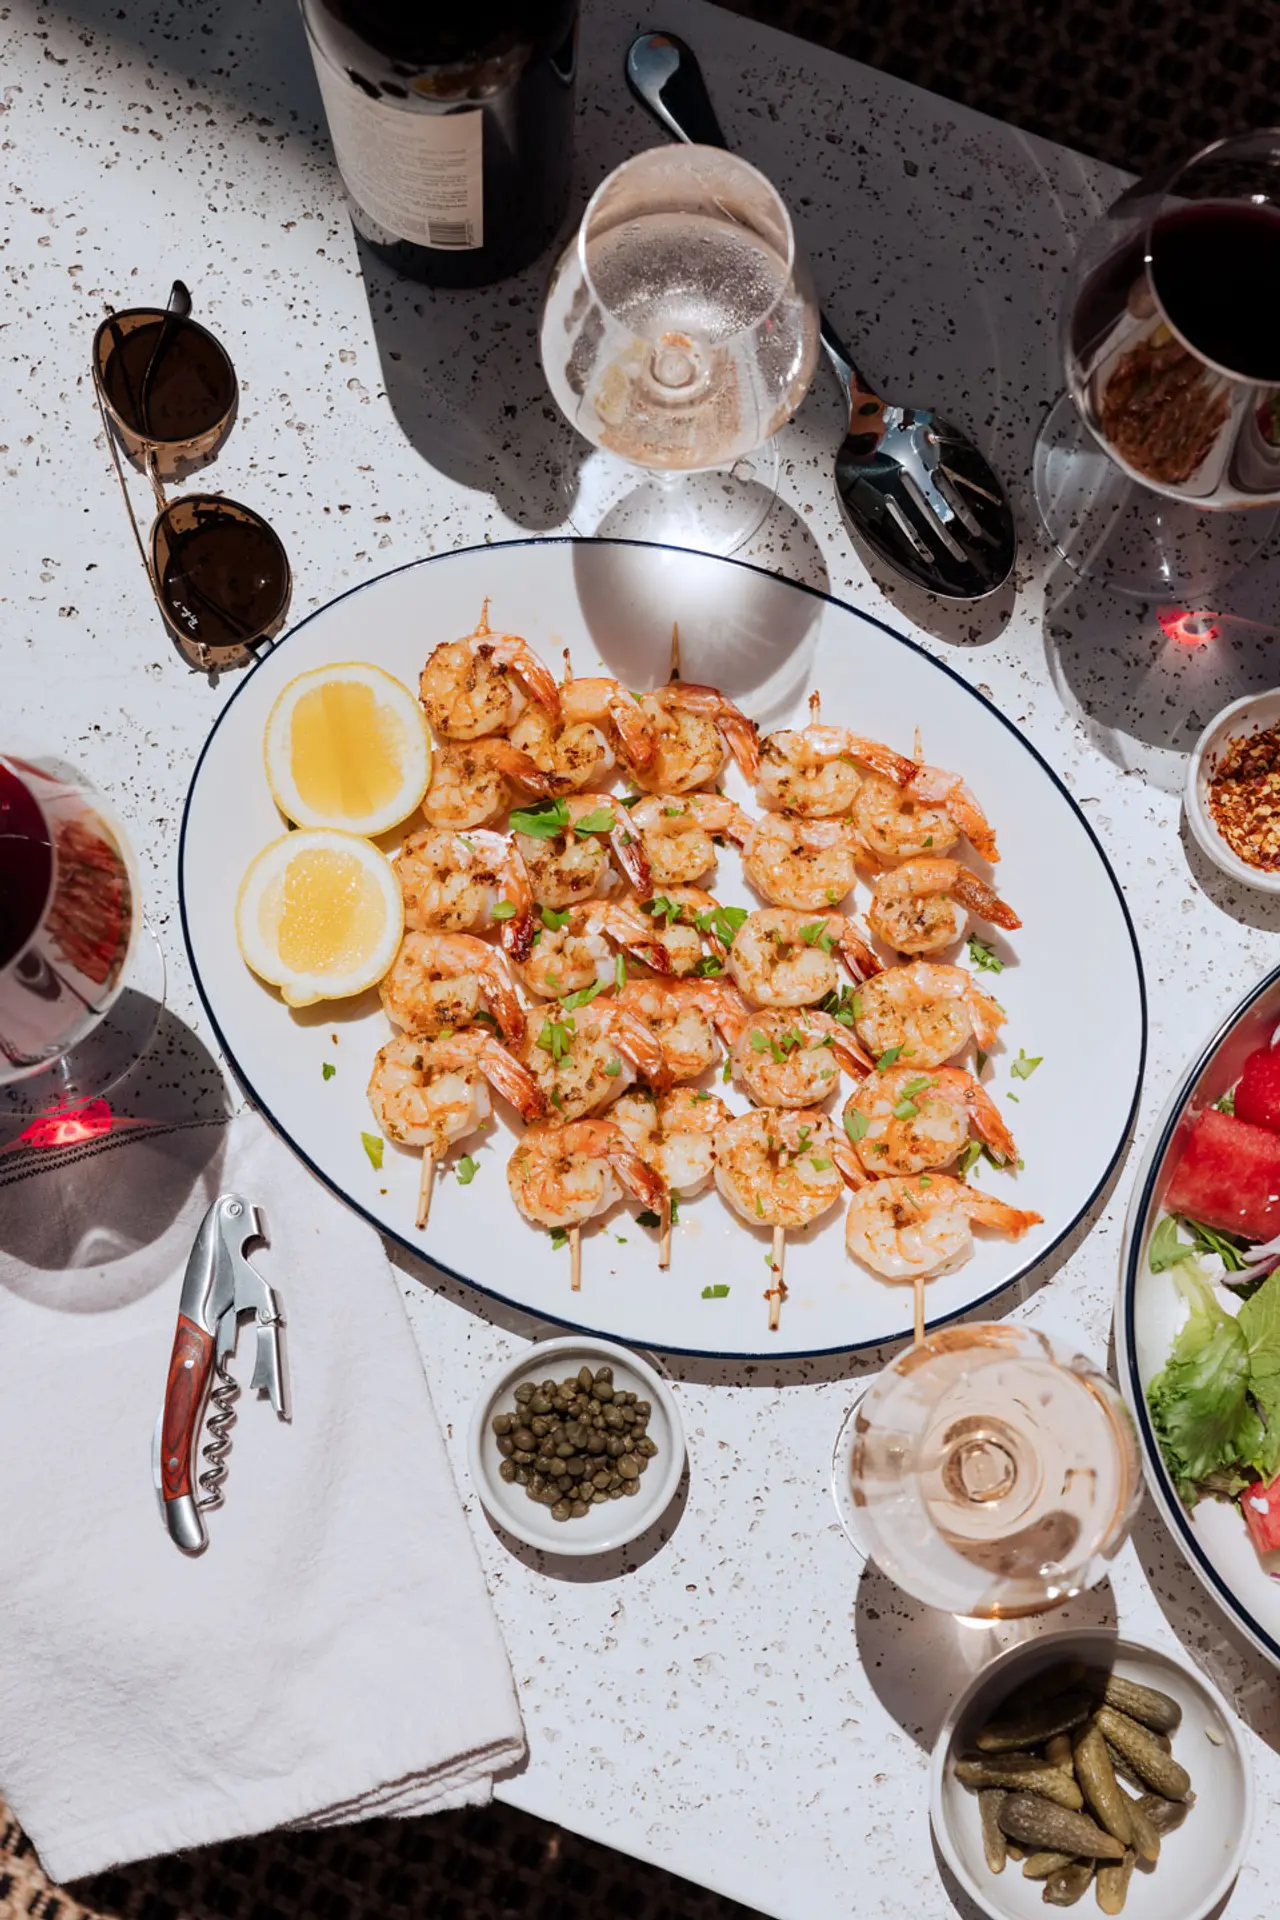 A plate of grilled shrimp garnished with herbs is surrounded by various condiments, glasses of wine, and dishes on a sunlit table.